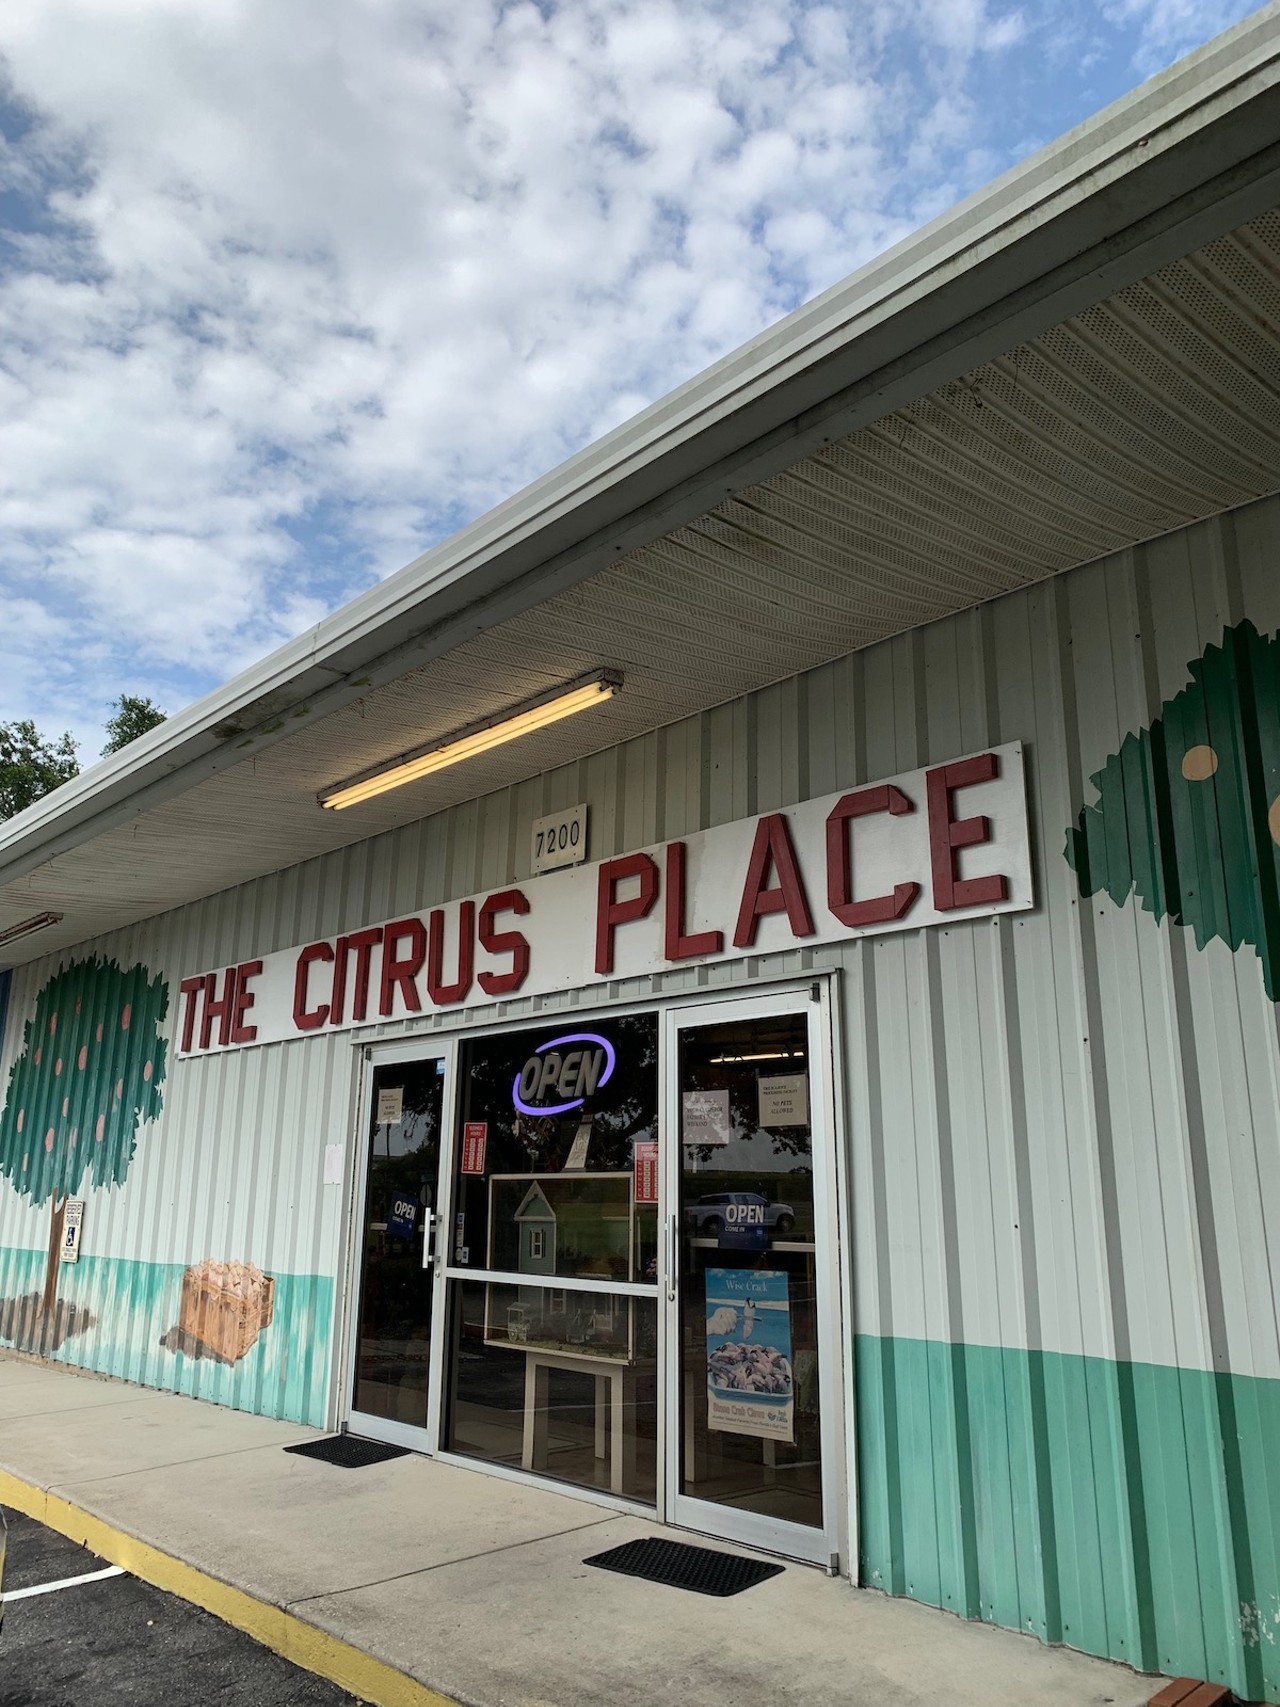 Get fresh juice and pie at the Citrus Place7200 U.S. Hwy-19, Terra Ceia. (941) 722-6745 This family owned shop is just off the highway in Terra Ceia and it's the place to go for fresh orange juice and delicious key lime pie.